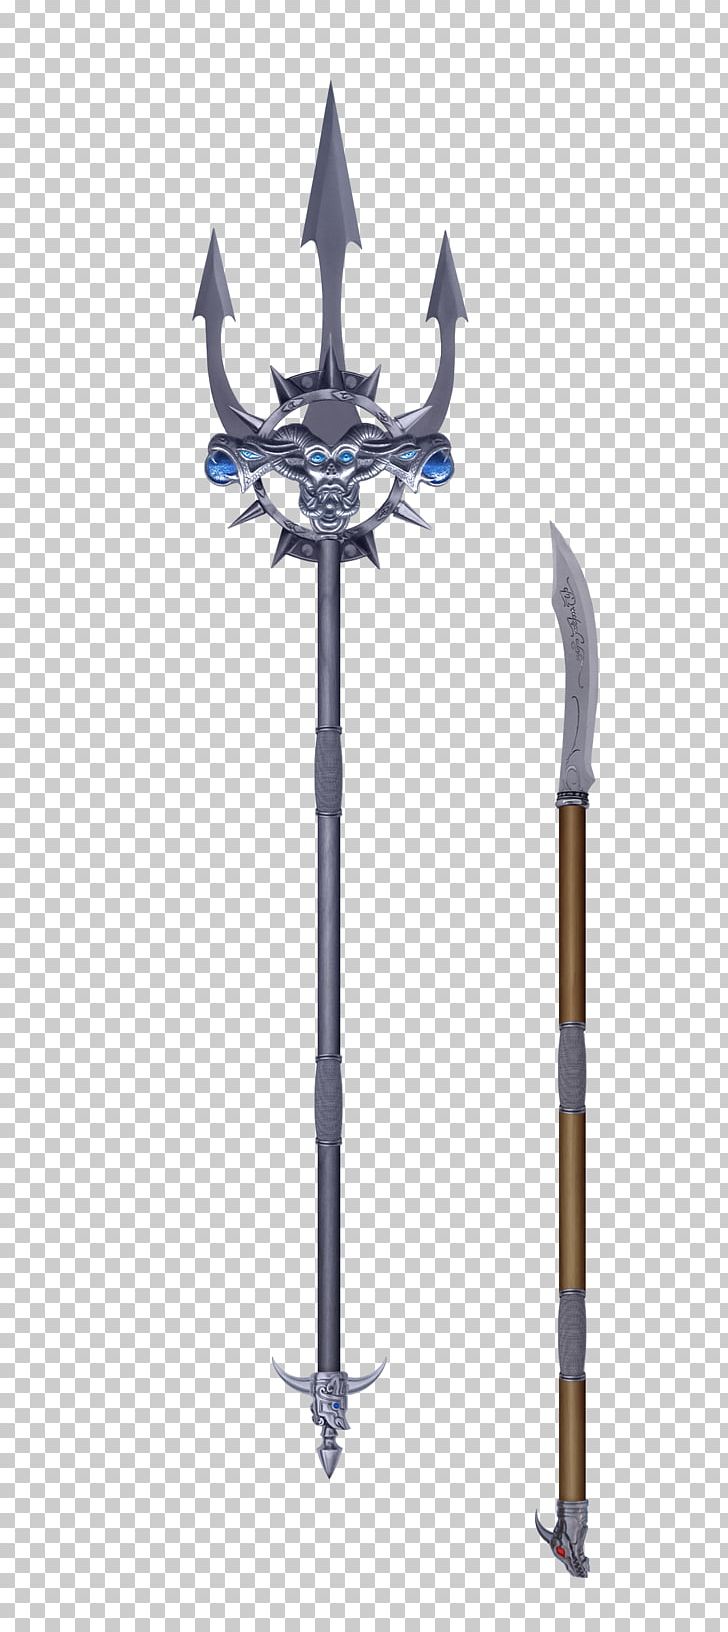 Sword Knife Weapon Trident PNG, Clipart, Ancient, Ancient Weapons, Arma Bianca, Arms, Cold Free PNG Download